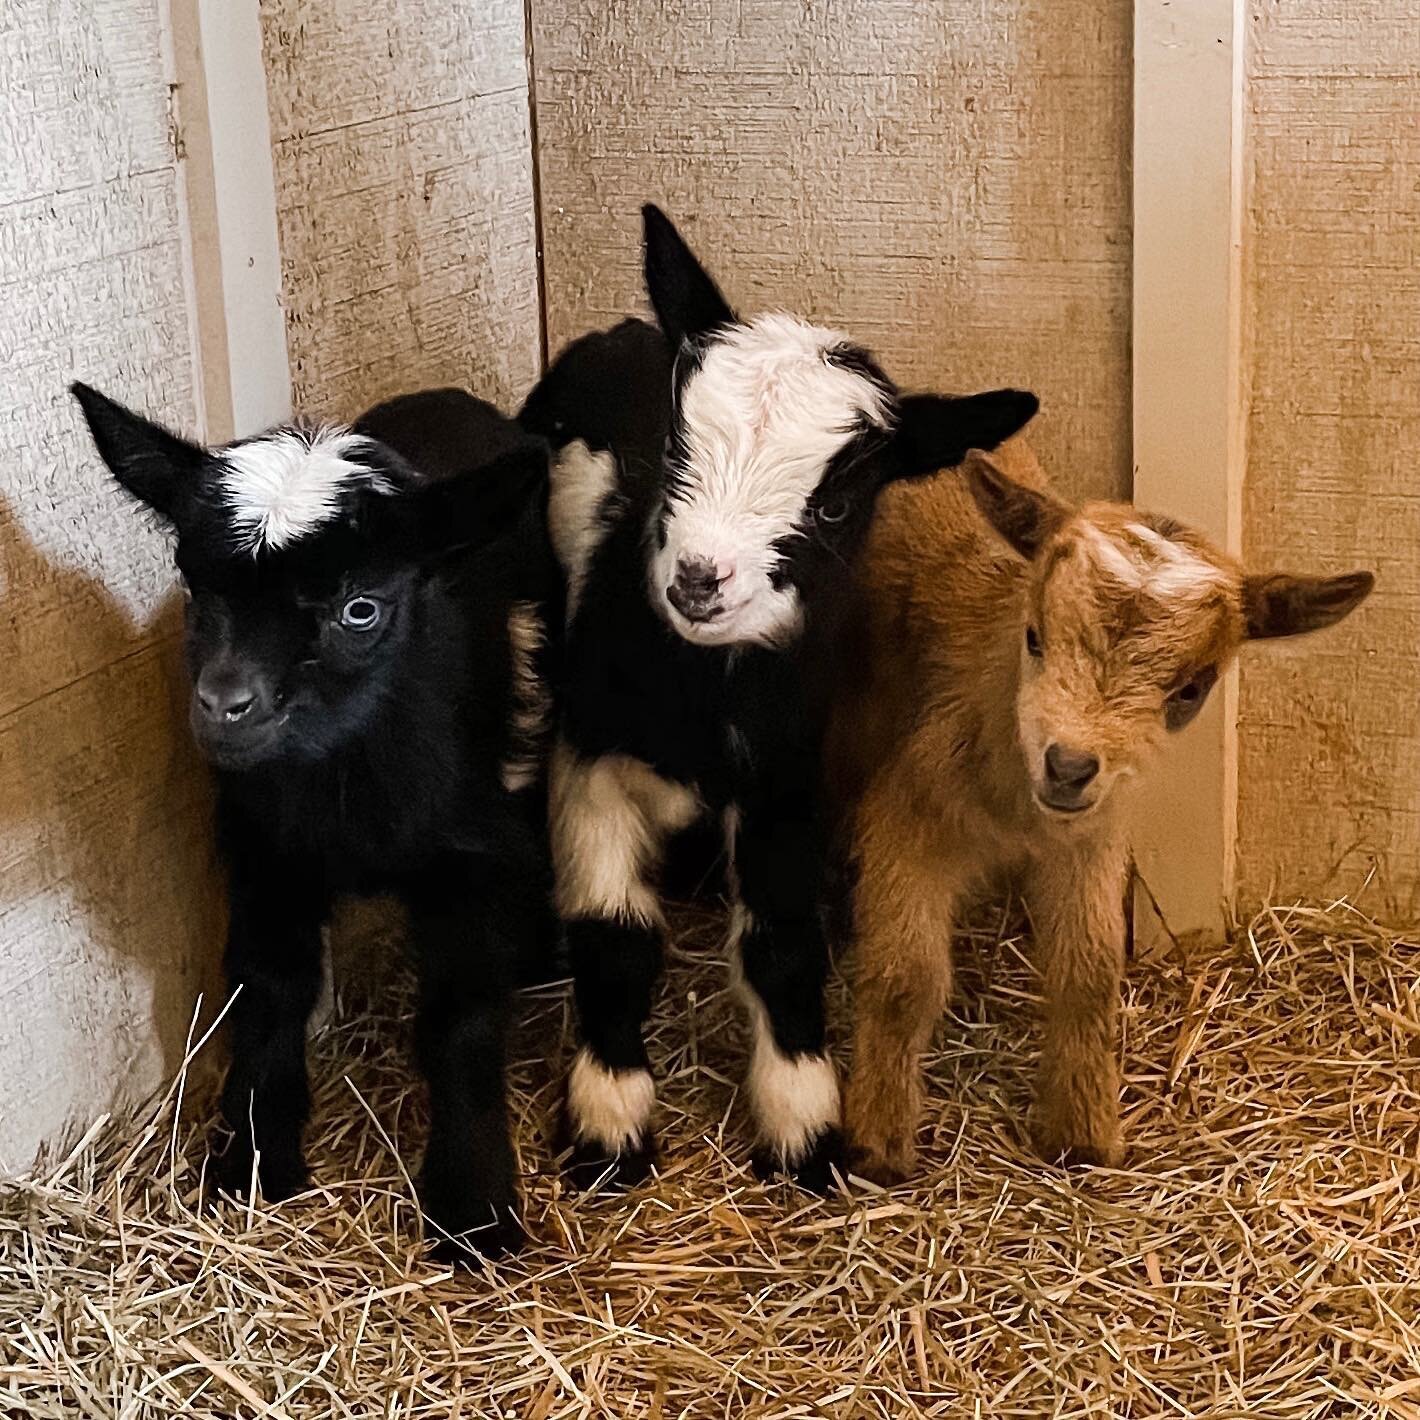 Kidding Season 2021 has begun! Bella, our herd Queen, delivered 3 beautiful kiddos last night.  2 girls/1 boy. It was also our first breach birth. Mom and babies are doing great.

#kiddingseason #babygoats #babyanimals #nigeriandwarfgoats #cute #goat